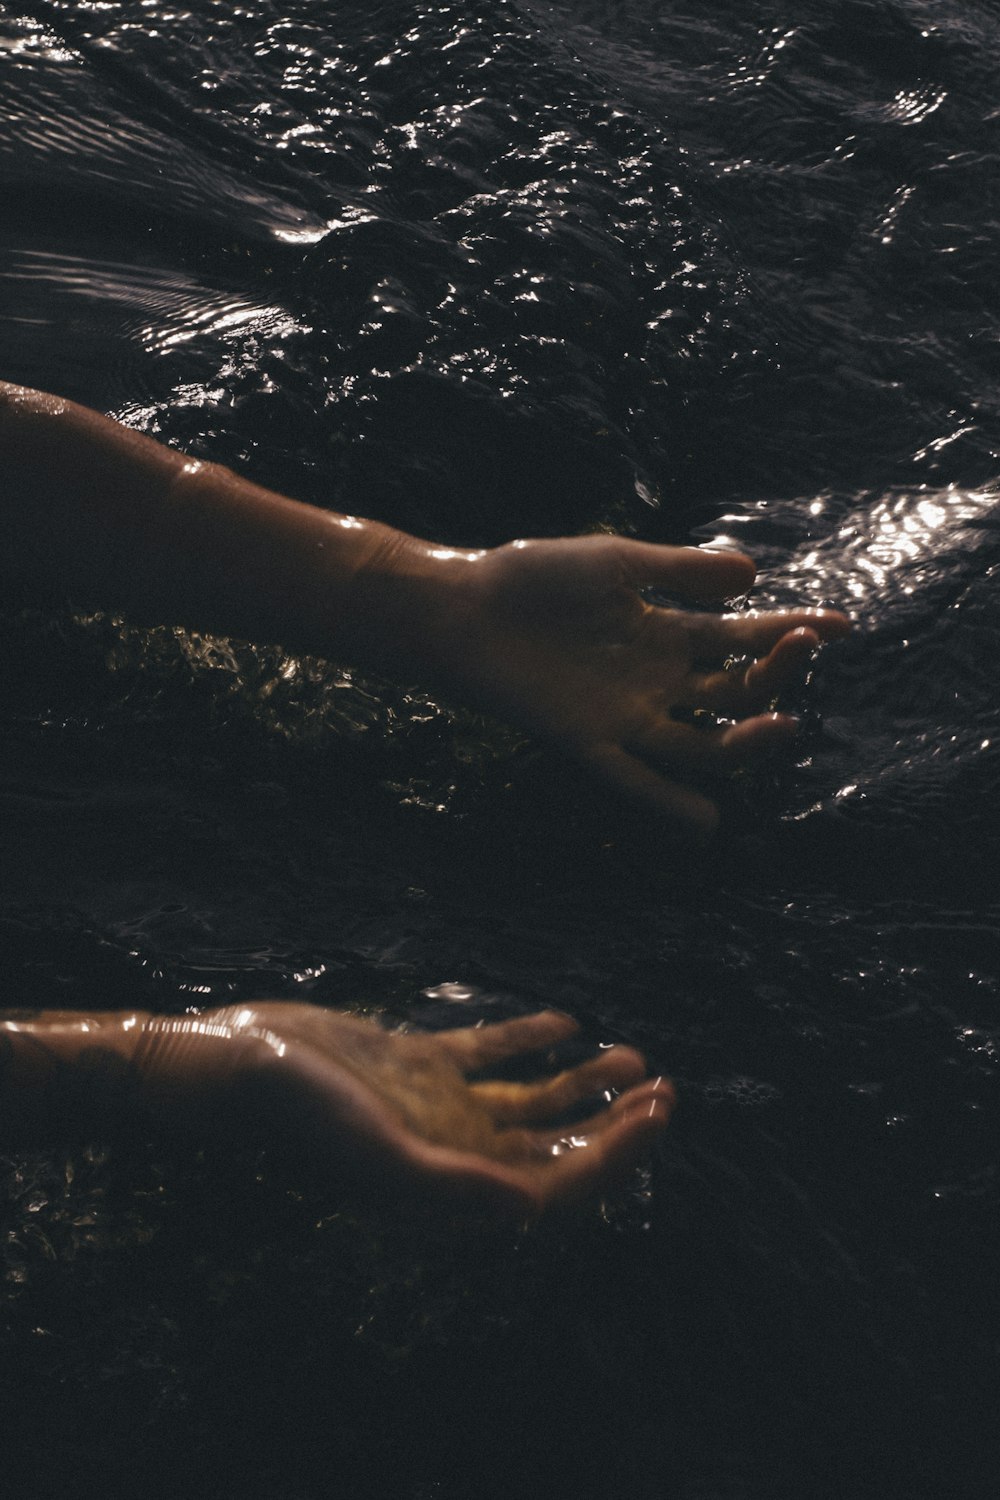 Persons feet on water photo – Free Water Image on Unsplash